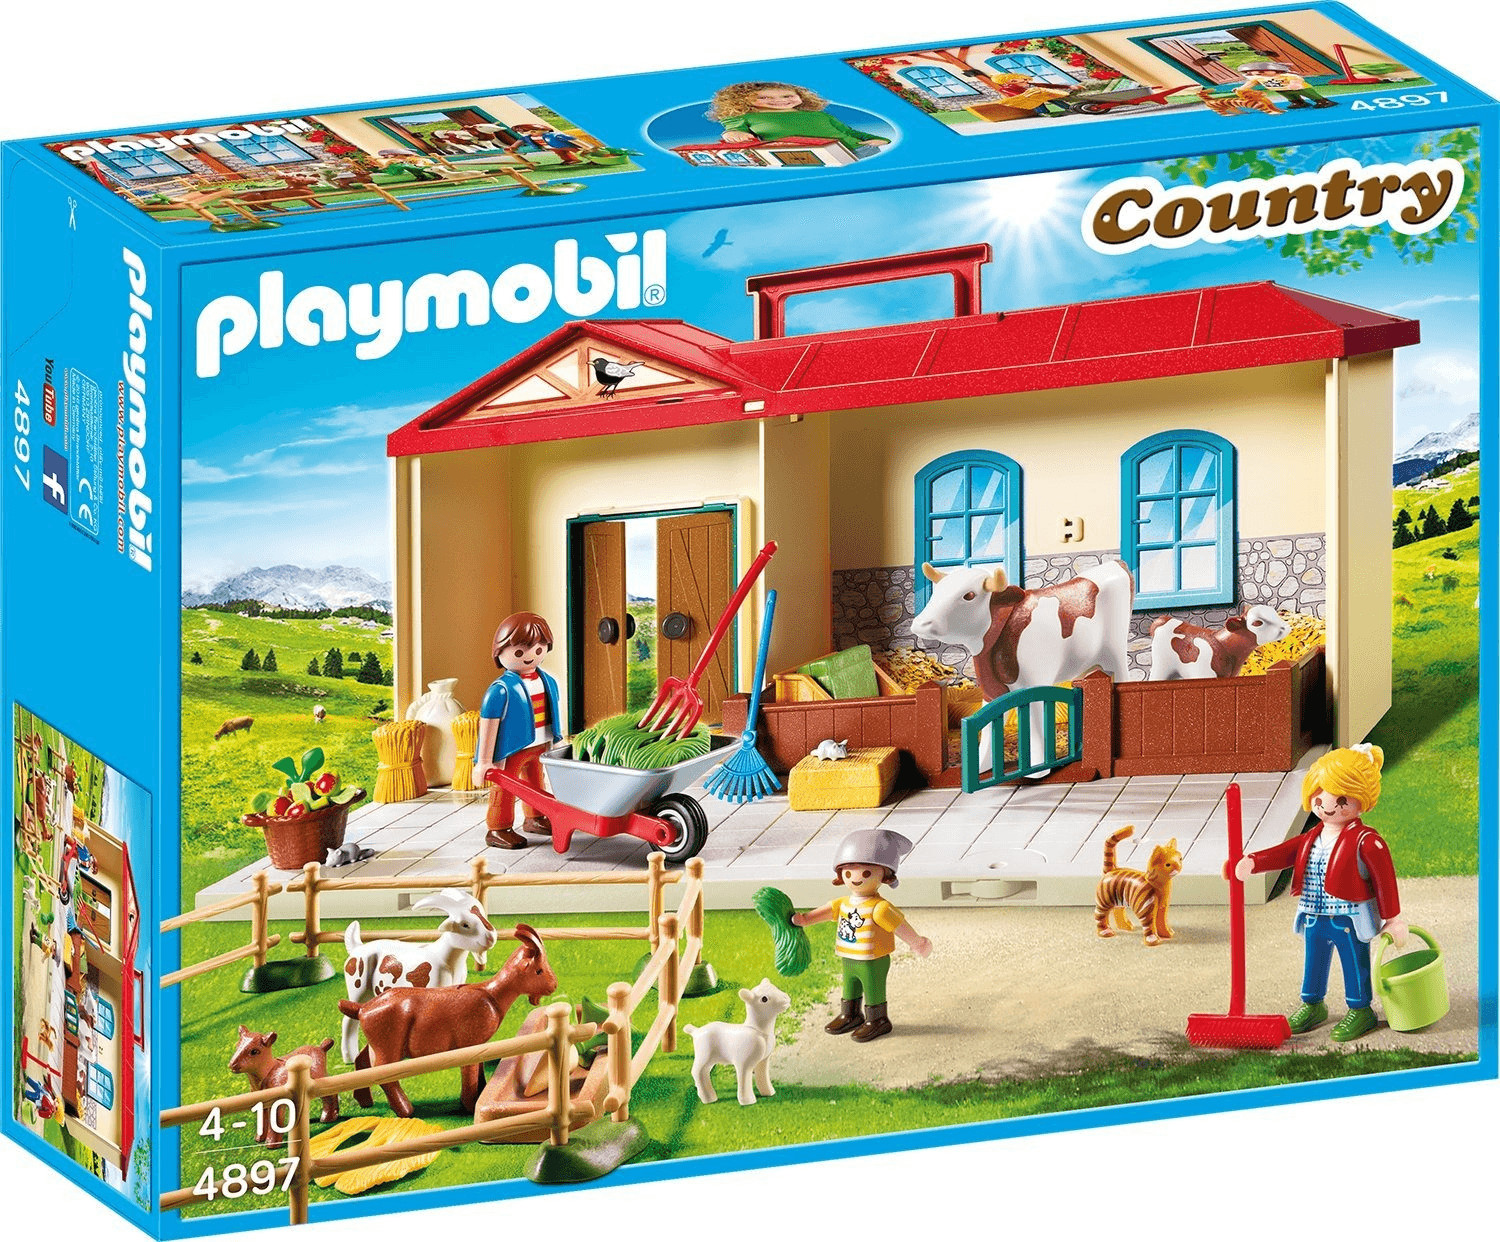 4142 ferme transportable playmobil country 